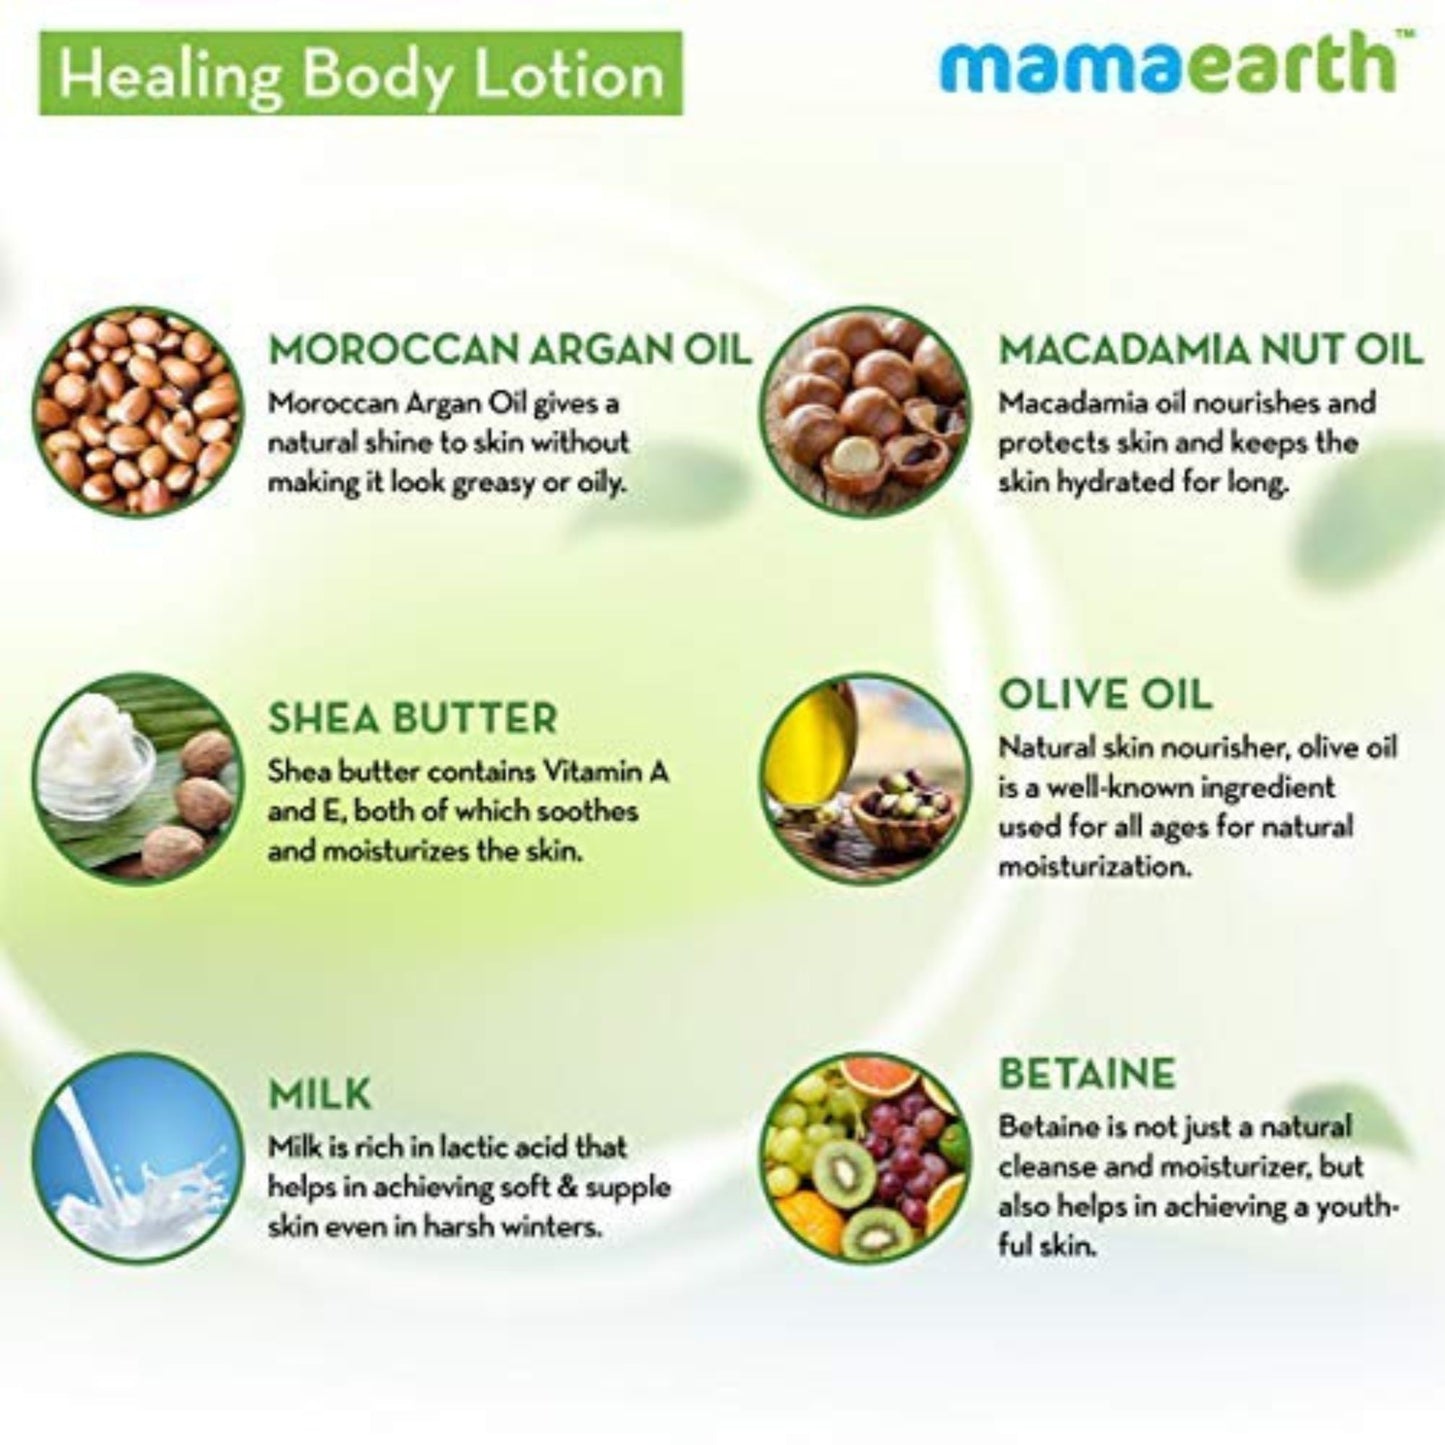 Mamaearth Healing Natural Body Lotion with Argan Oil & Macadamia Nut for Women & Men with Dry Skin for All Seasons, 250ml